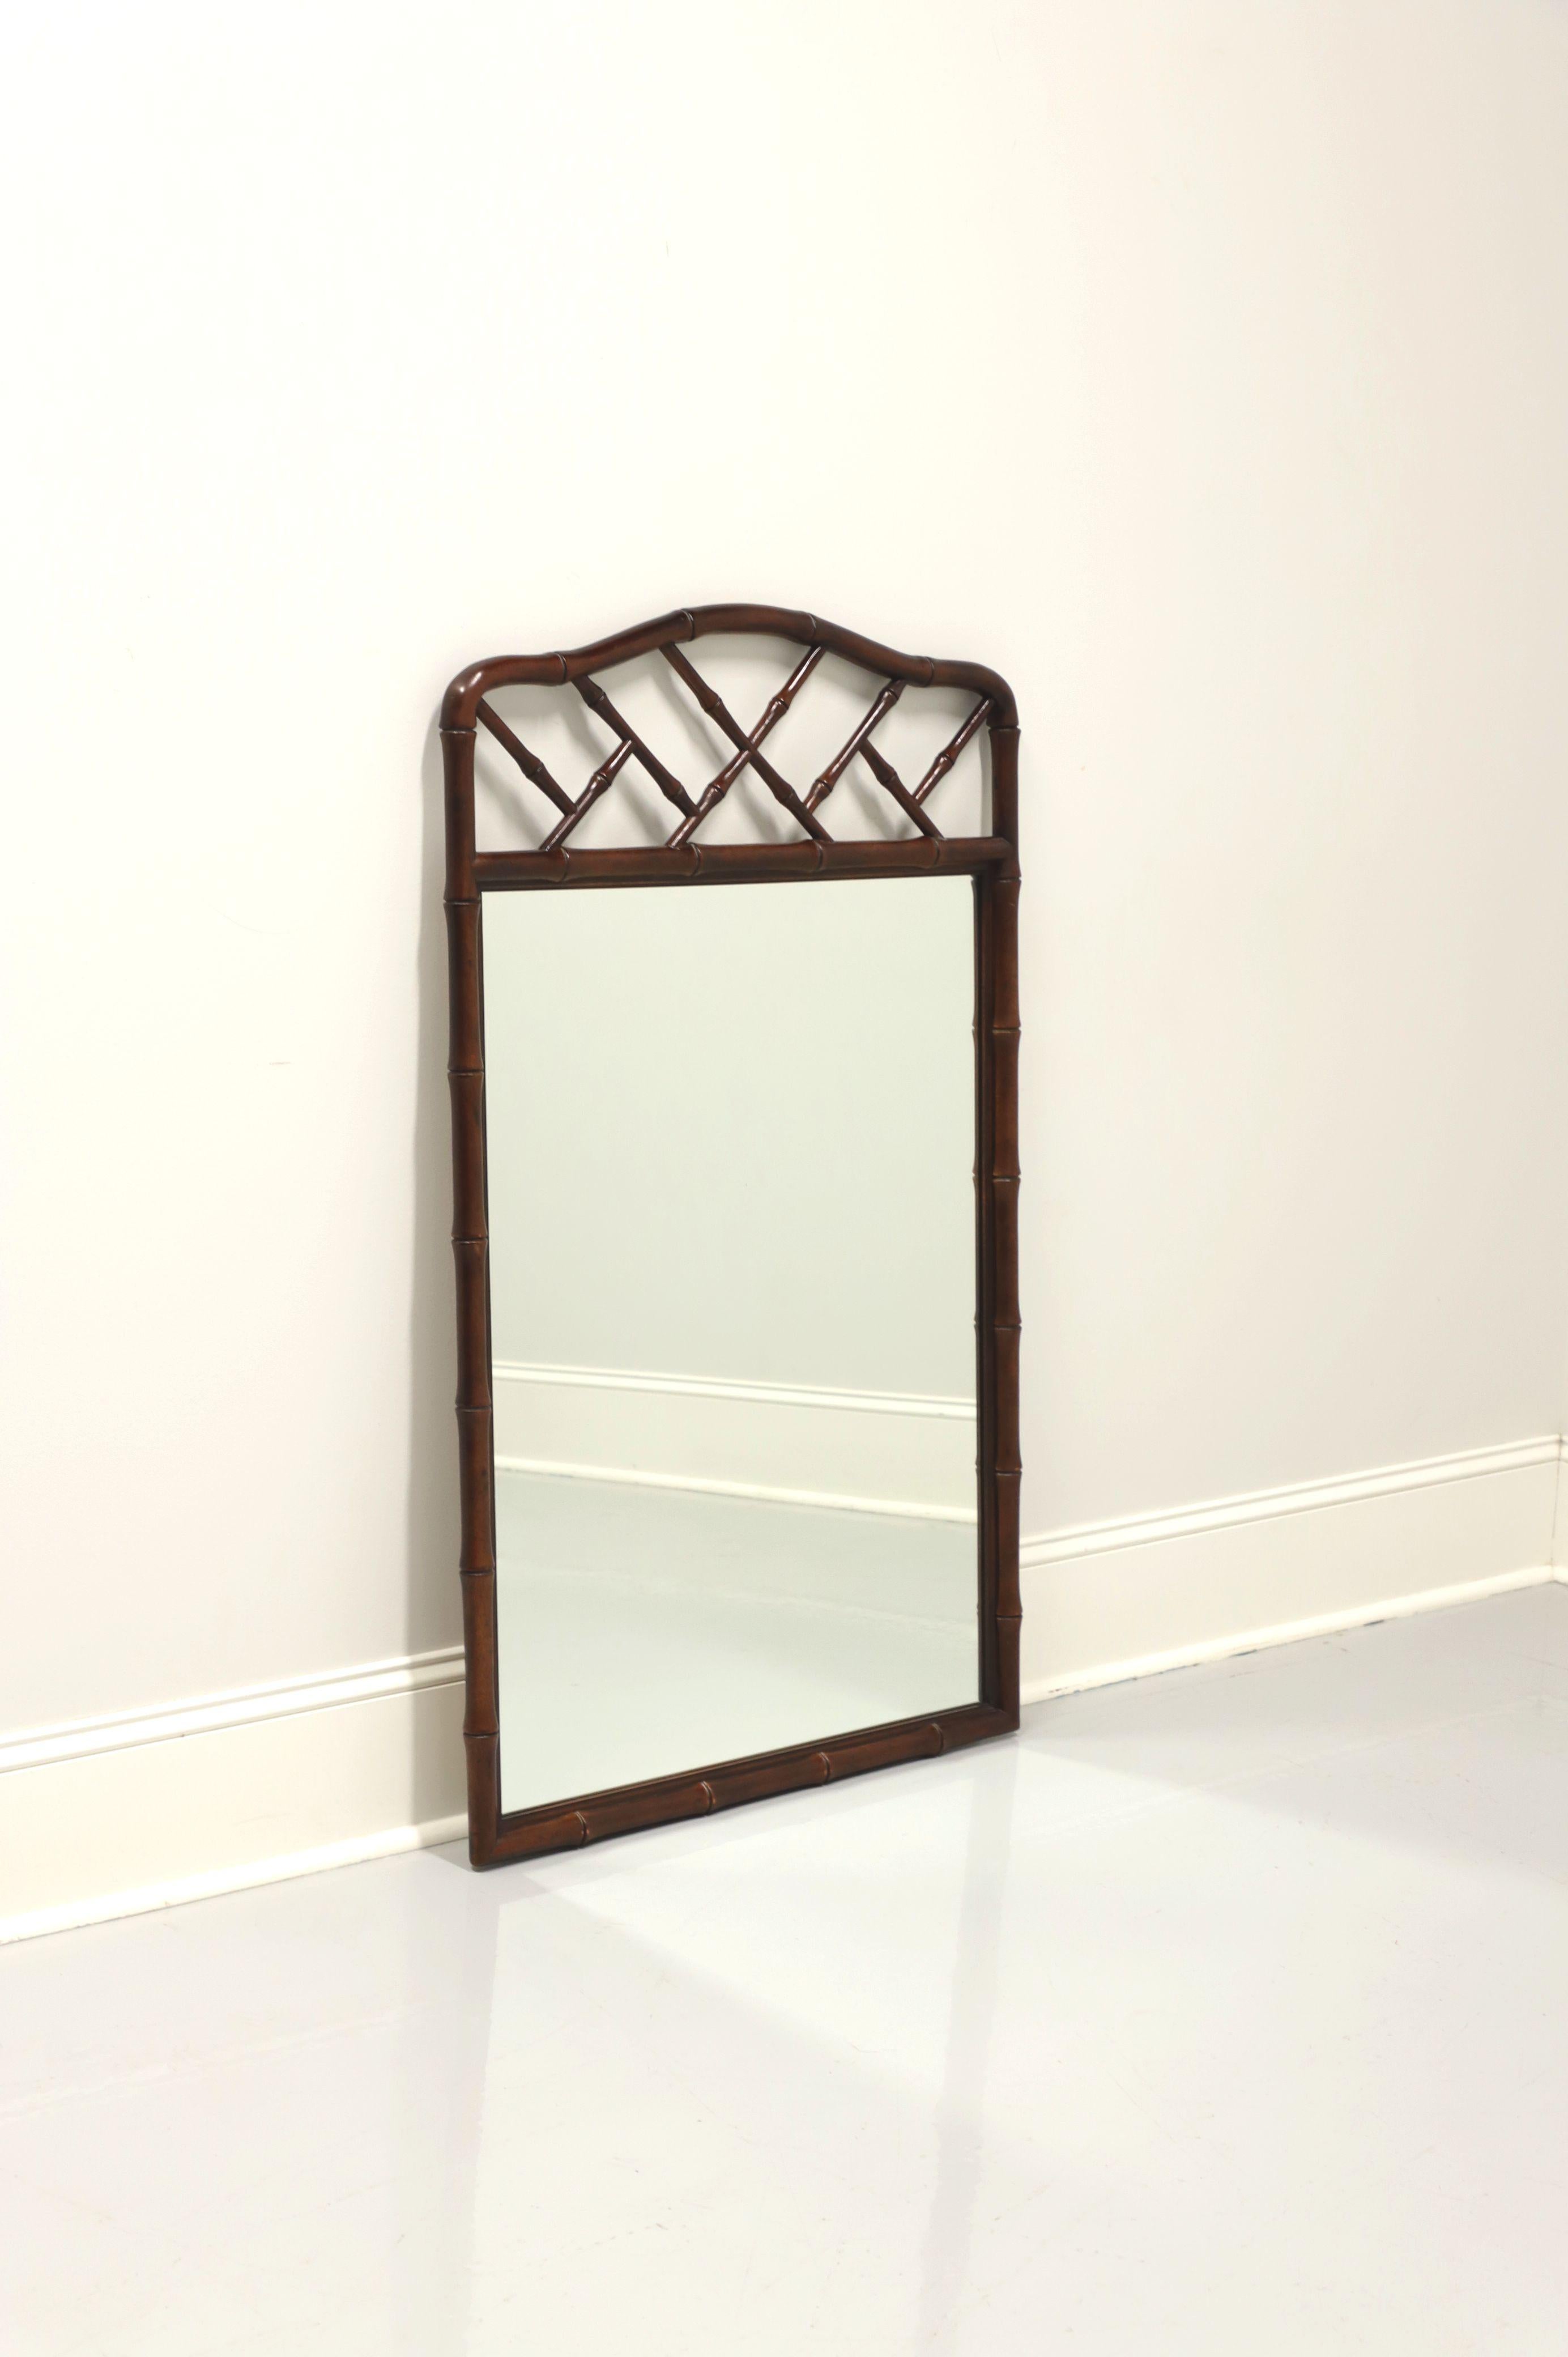 A Pan Asian style wall mirror by Henredon. Mirror glass and faux bamboo frame with arched fretwork top. Made in North Carolina, USA, circa 1973. 

Style #: 4-8101

Measures: 29 W 1.5 D 48 H, Weighs Approximately: 30 lbs

Exceptionally good condition